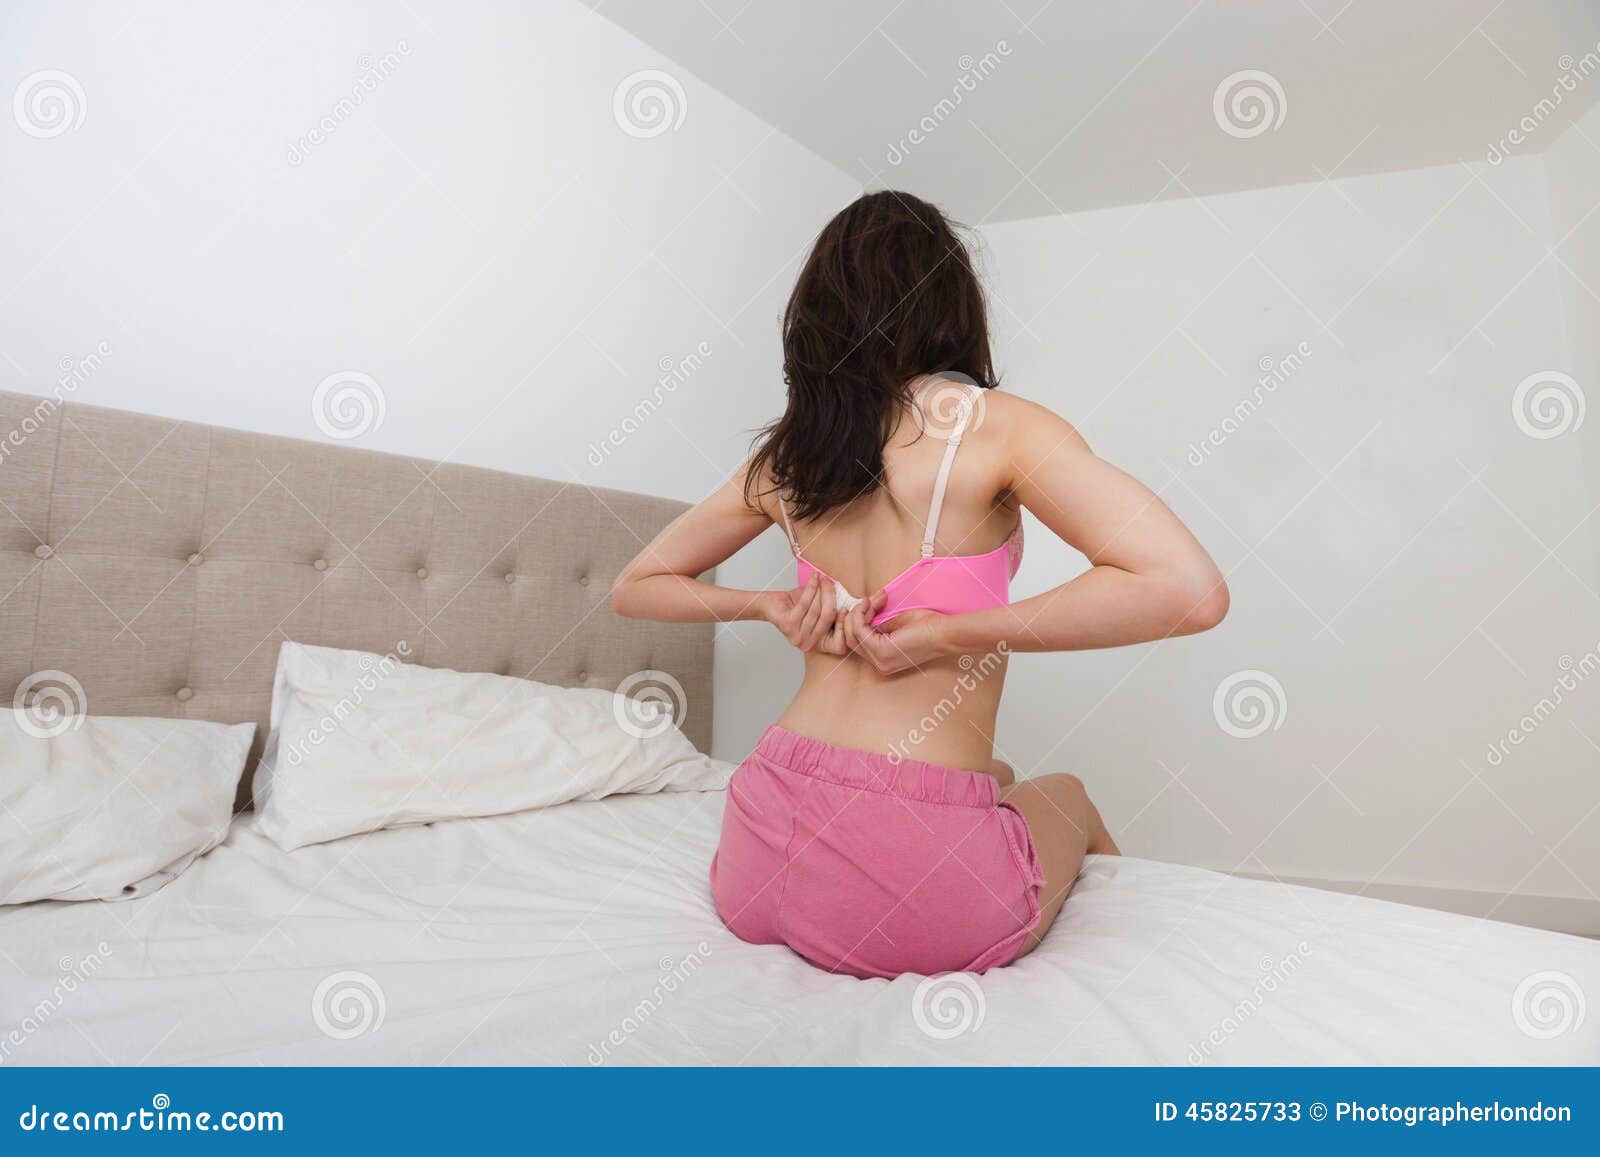 Rear View of Woman Fastening Bra in Bed Stock Image - Image of space,  frame: 45825733